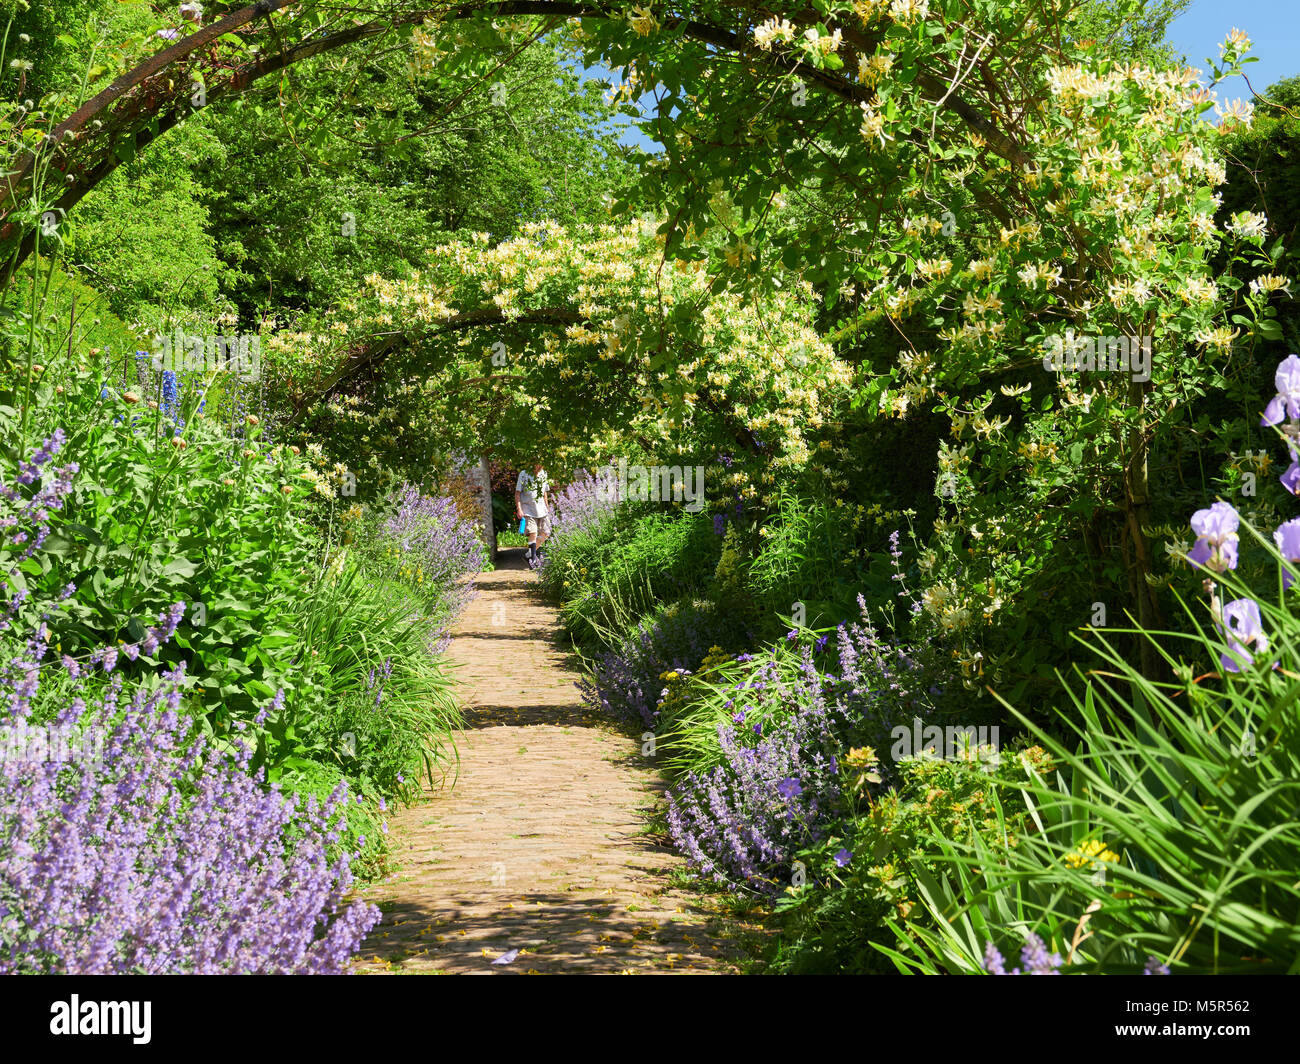 Honeysuckle arches over a garden path  on a sunny day in an English country Garden, UK. Stock Photo